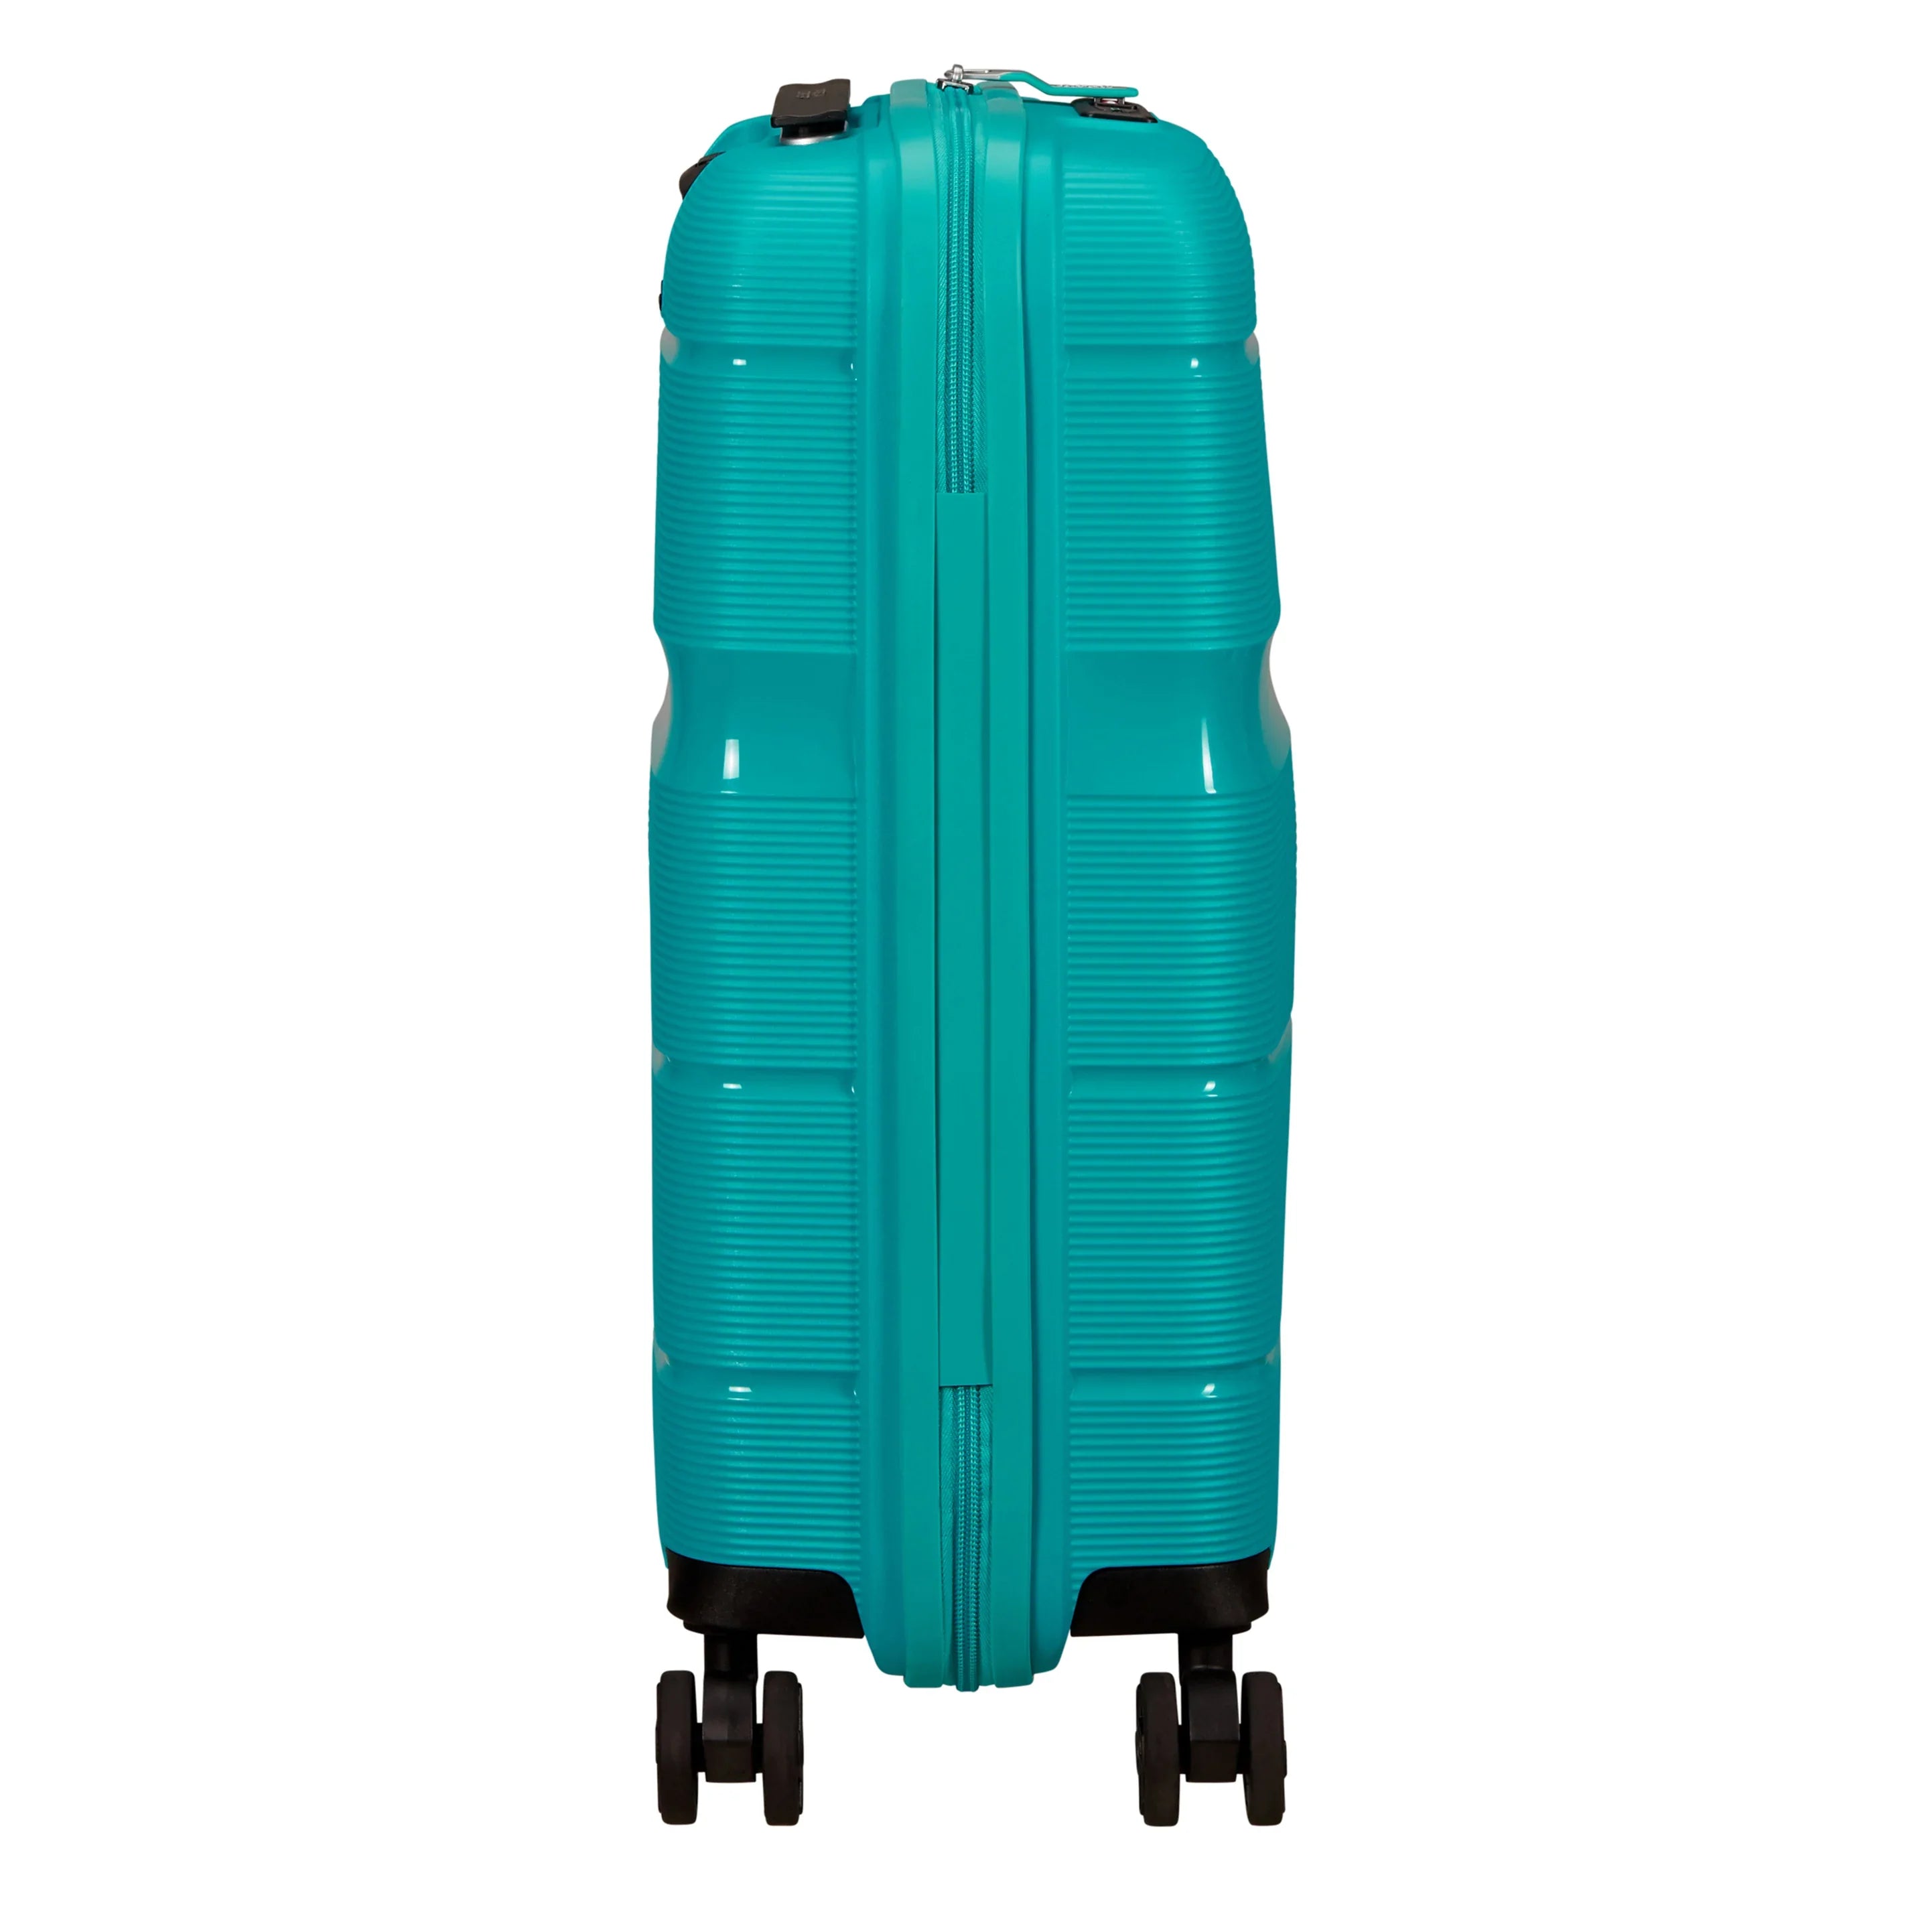 American Tourister Linex trolley cabine 4 roues 55 cm - marine profonde